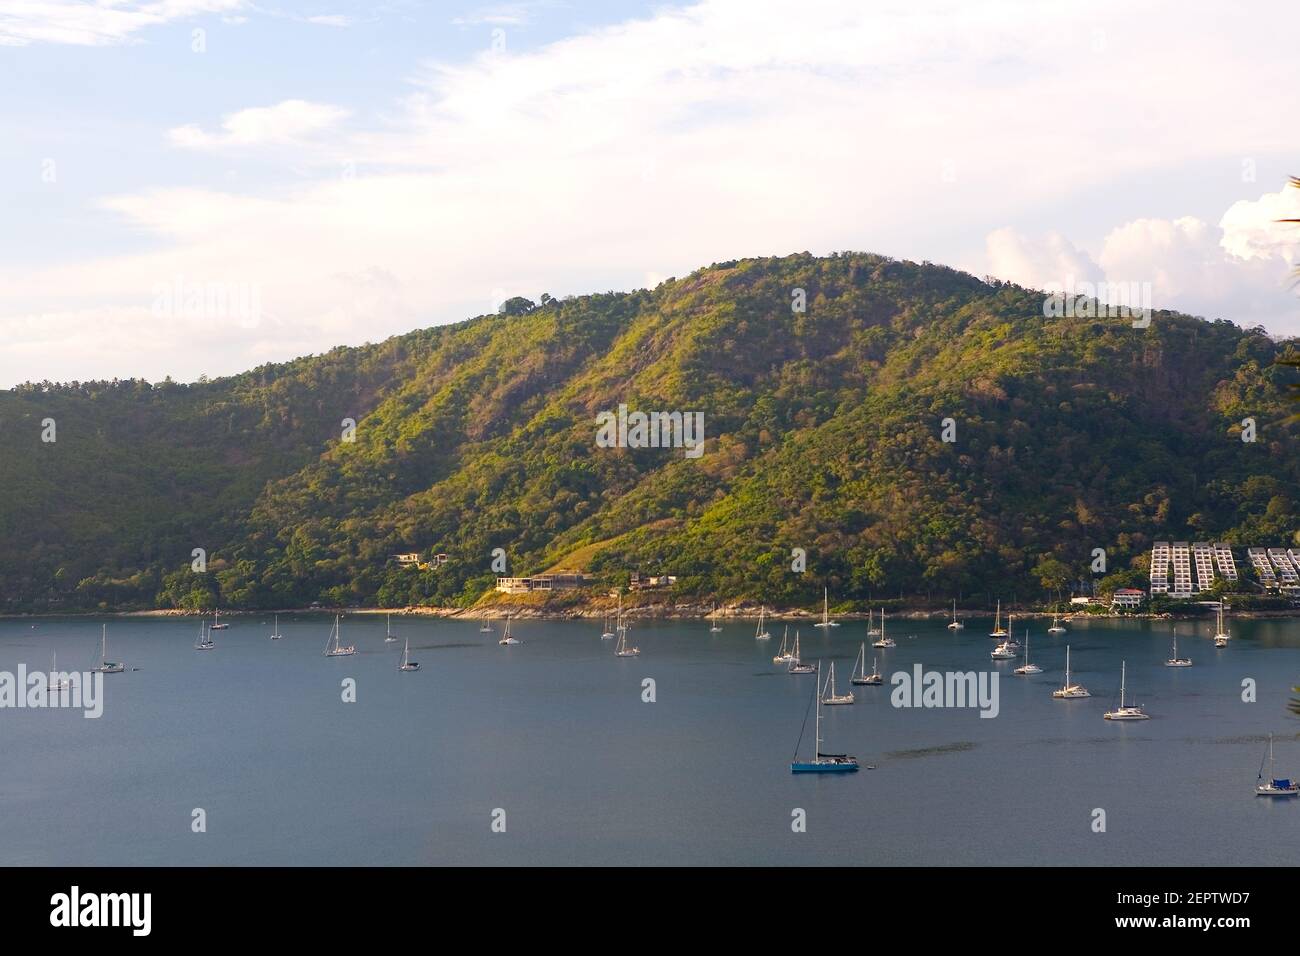 Yachts with lowered sails are in the bay. Thailand. Stock Photo